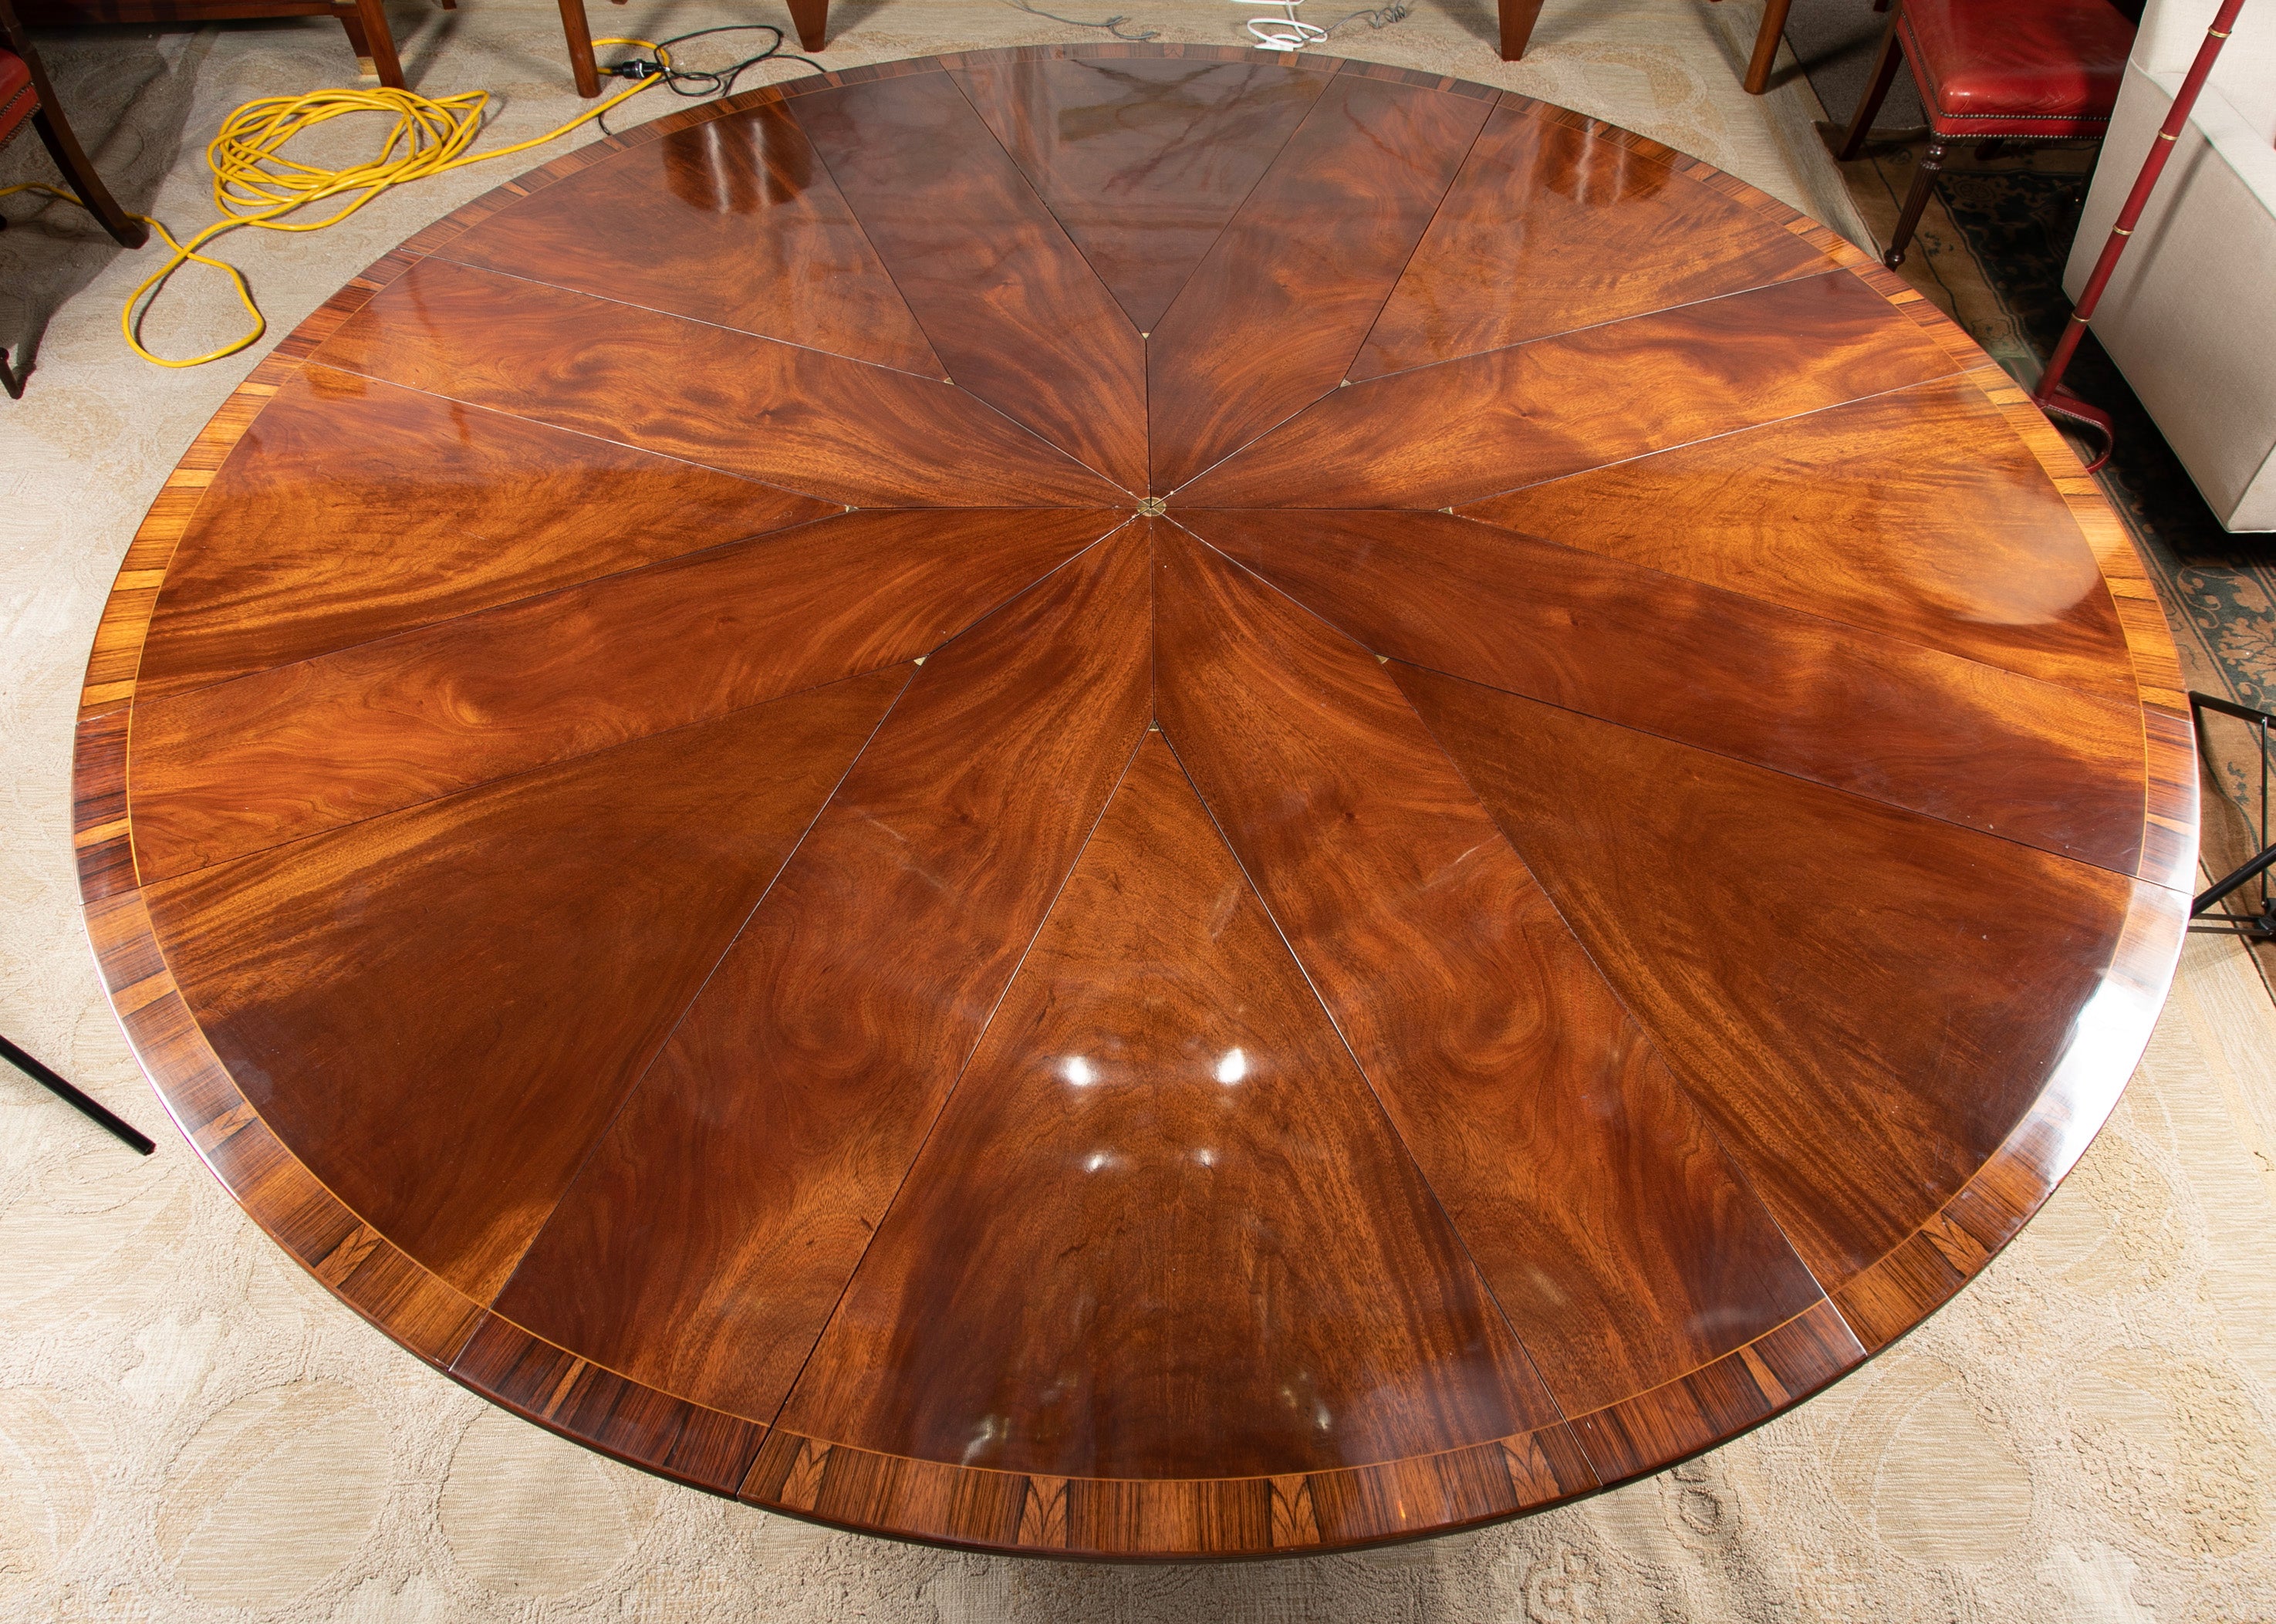 A Regency Style Jupe Dining Table in Mahogany